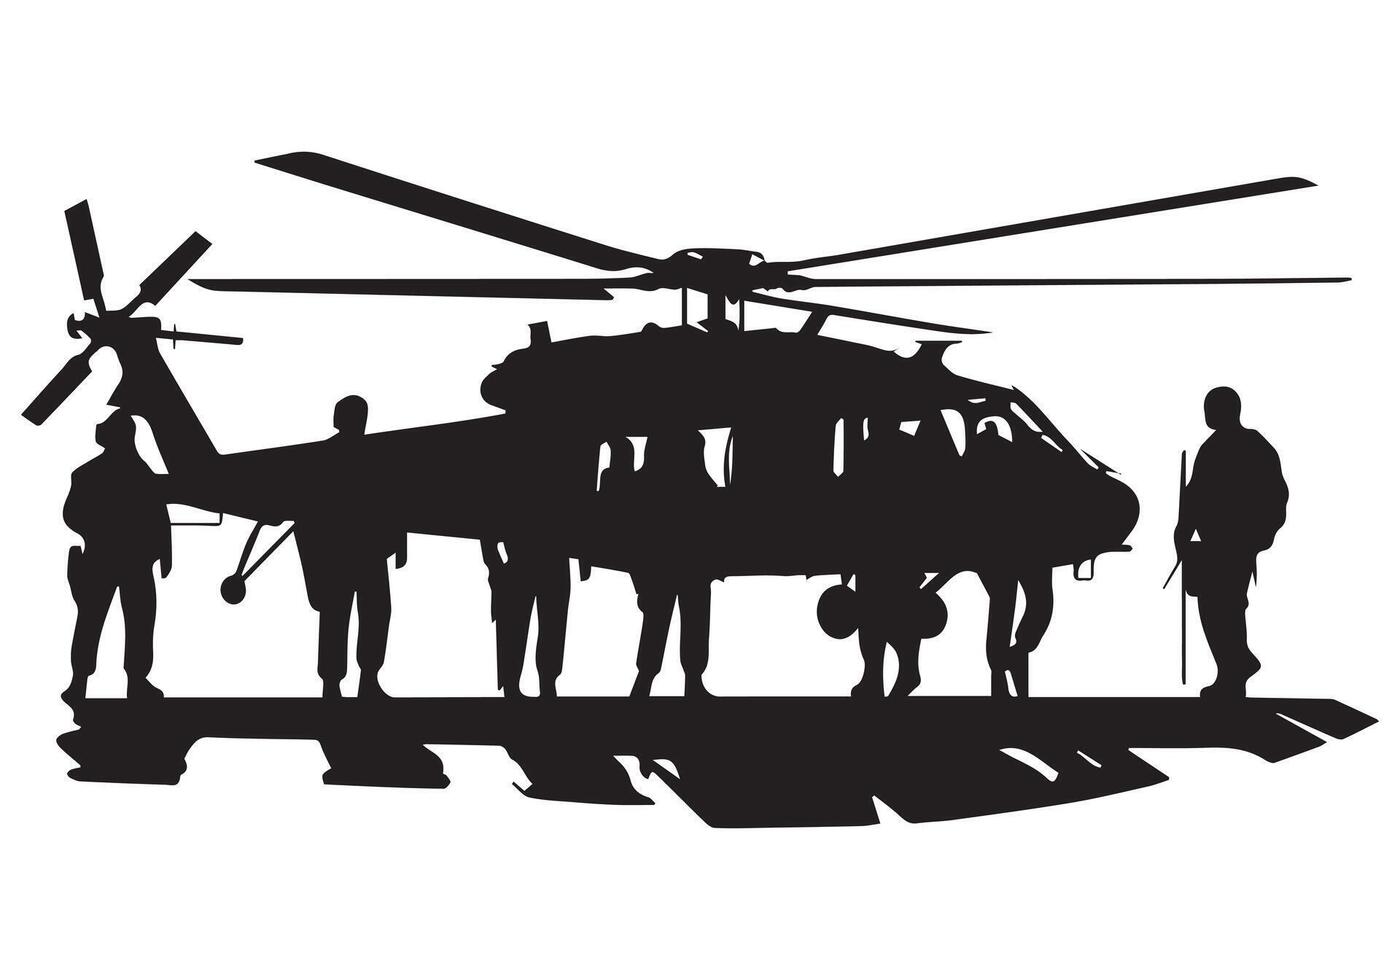 Military Helicopter Silhouette pro bundile vector